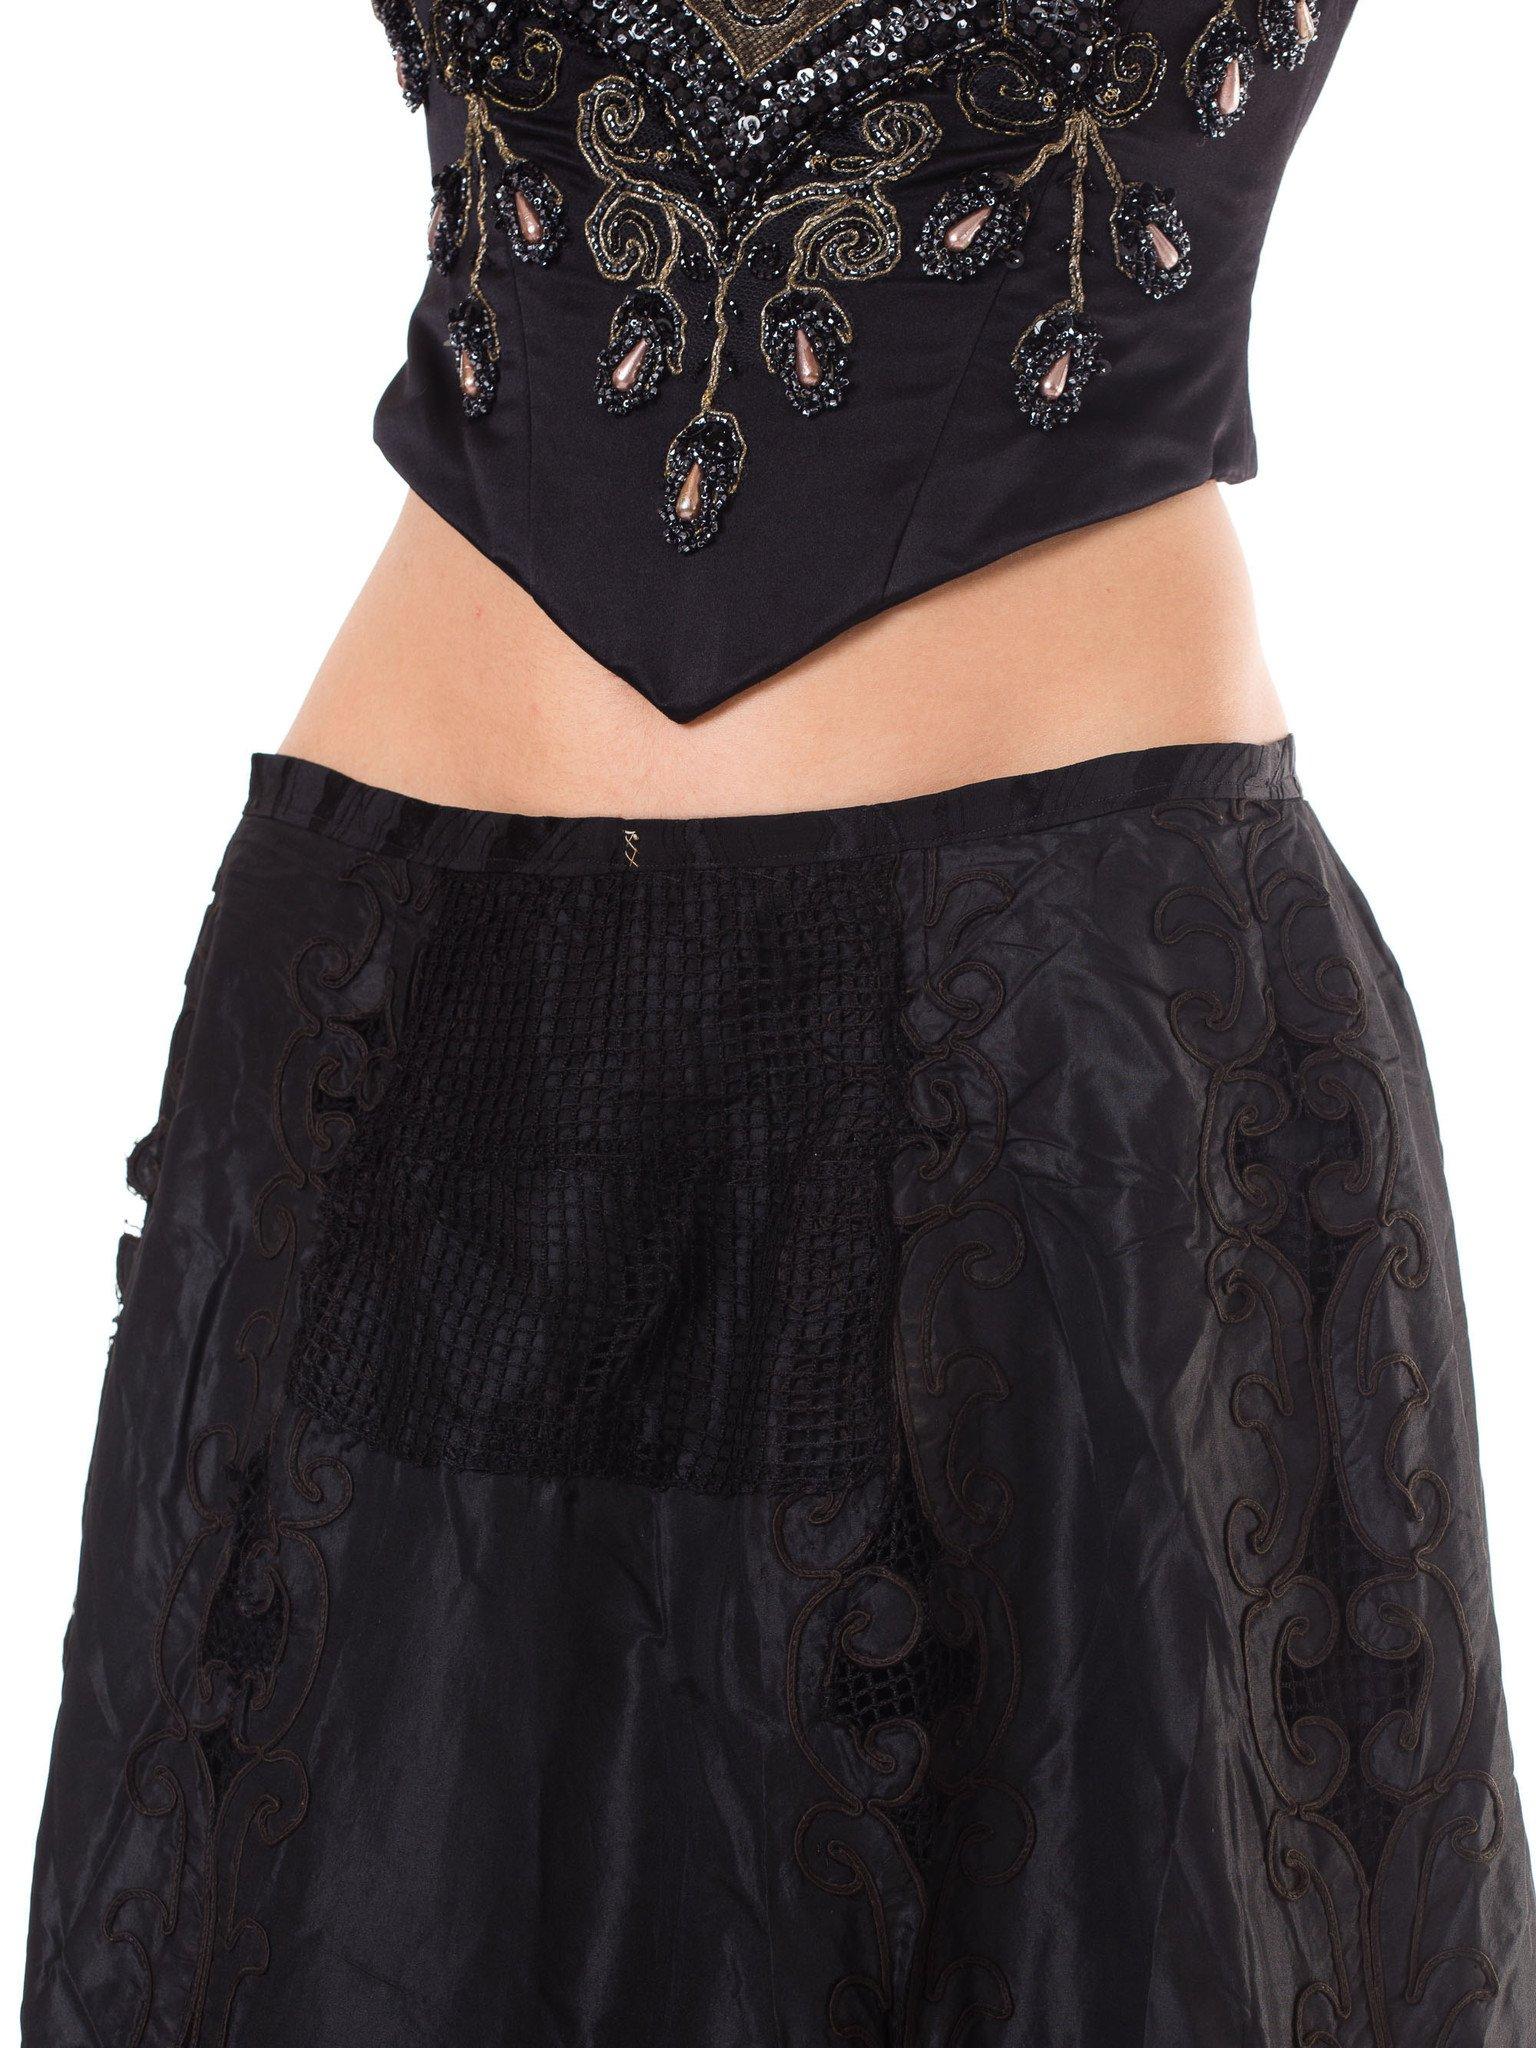 Women's 1800S Black Victorian Silk & Lace Tiered Skirt With Appliqués For Sale